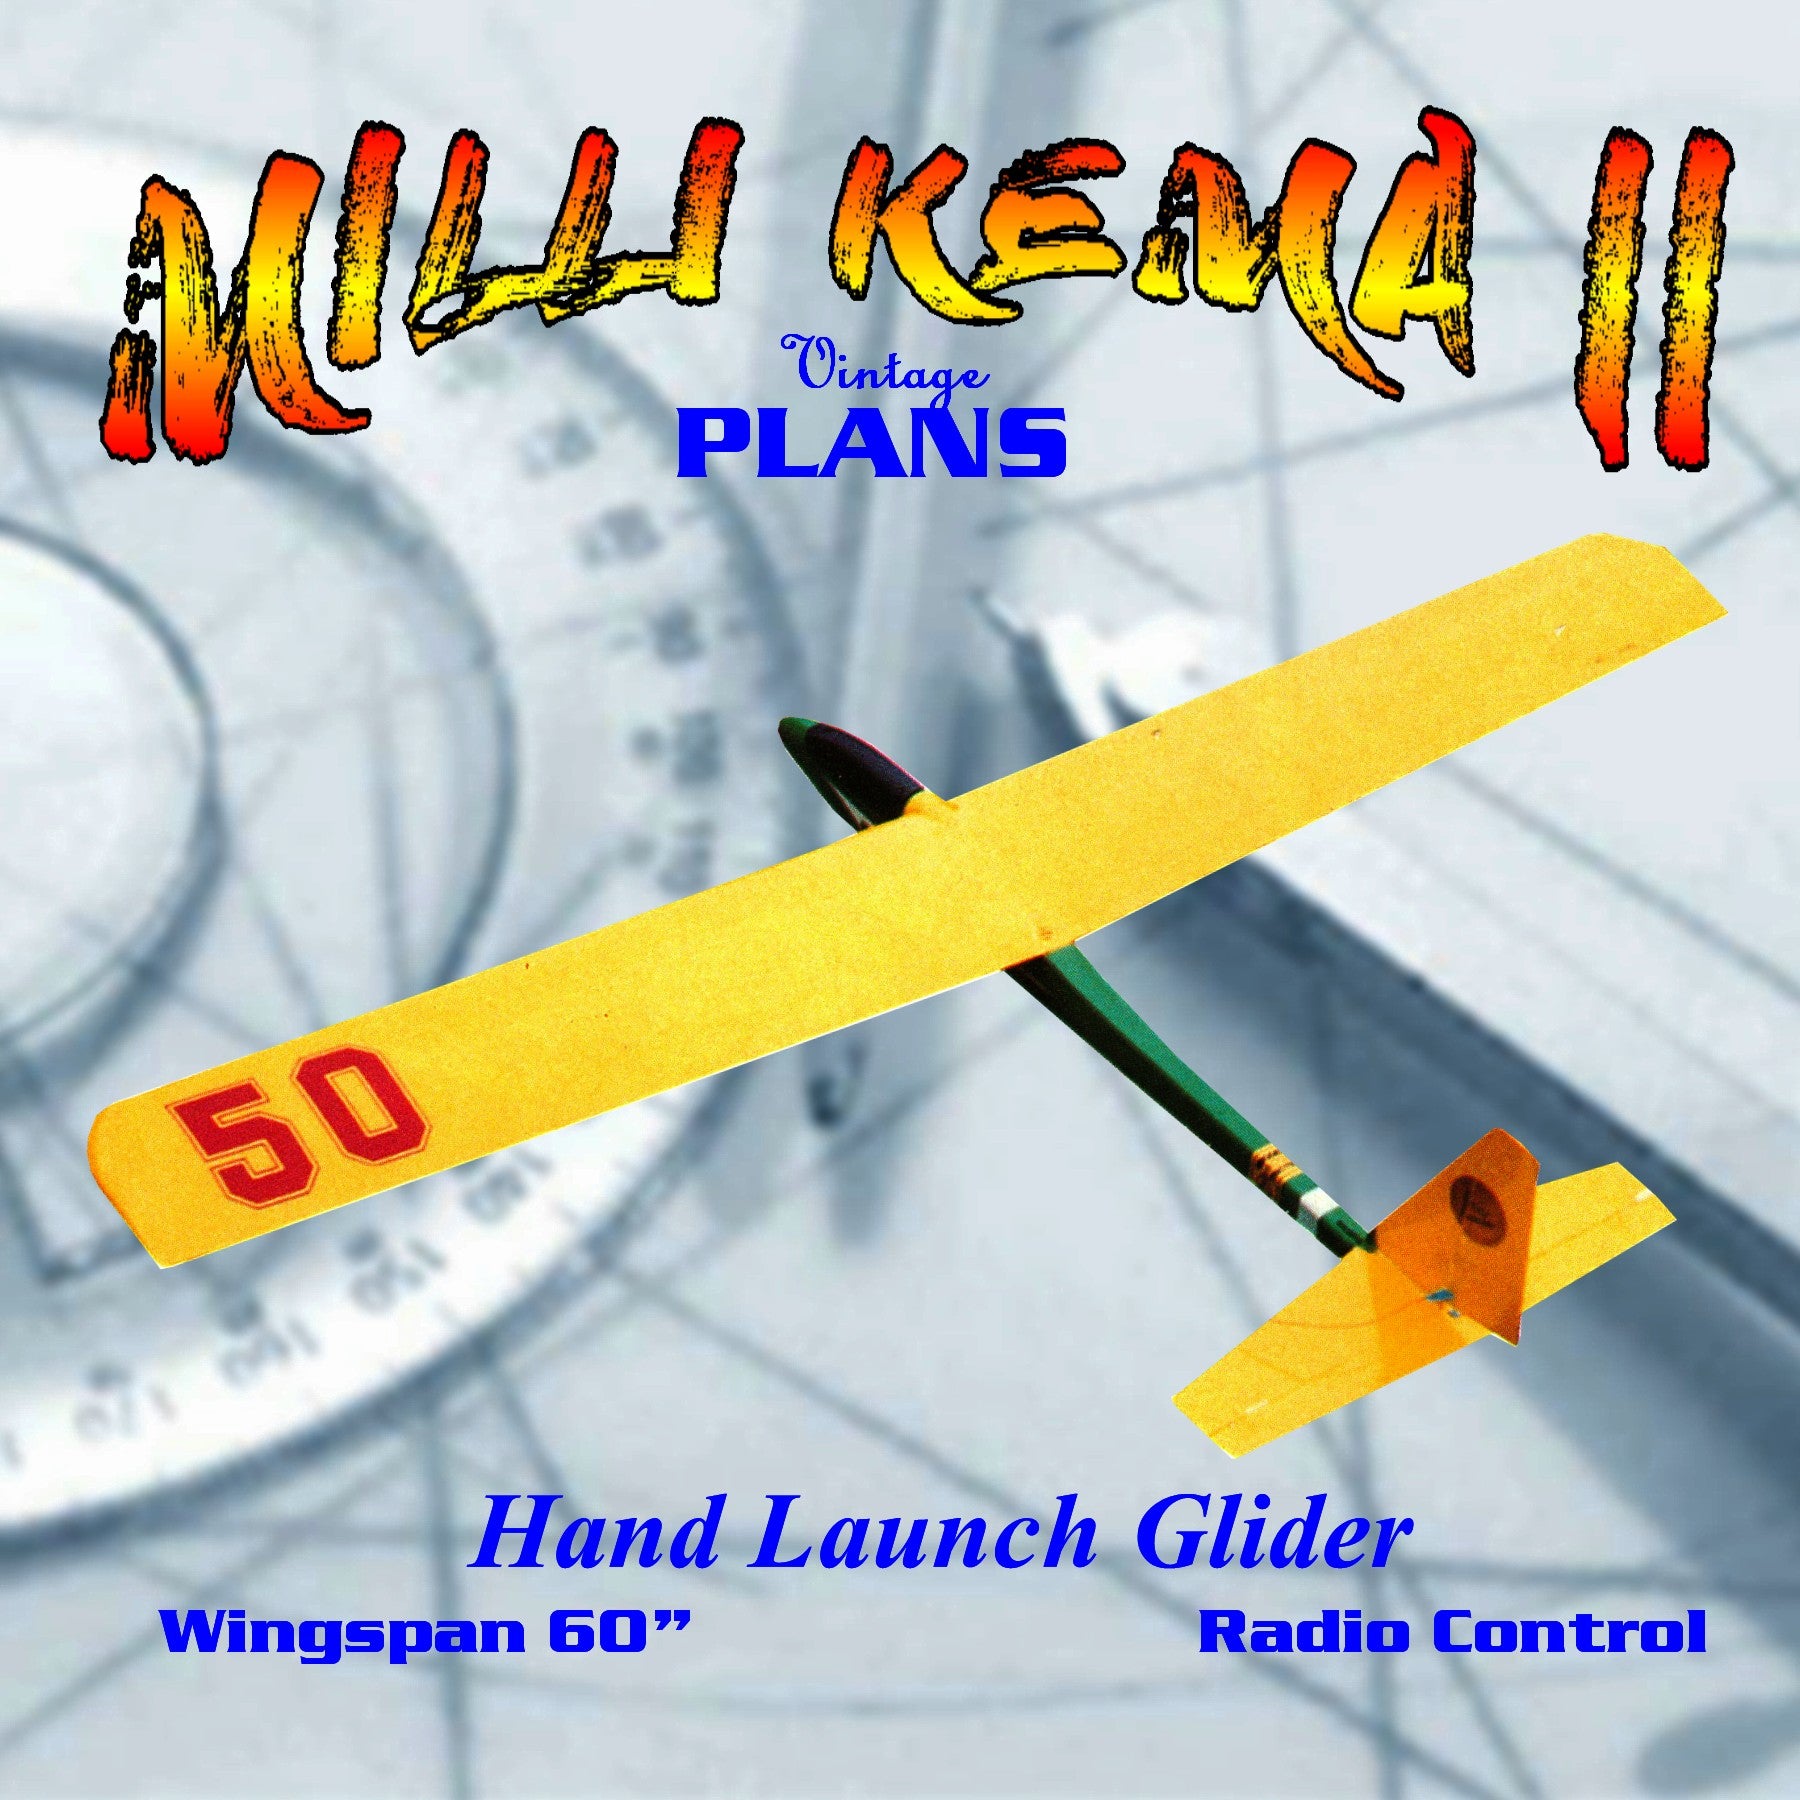 full size printed plan hand launch glider 60 " w/s for r/c lightweight, simple to build